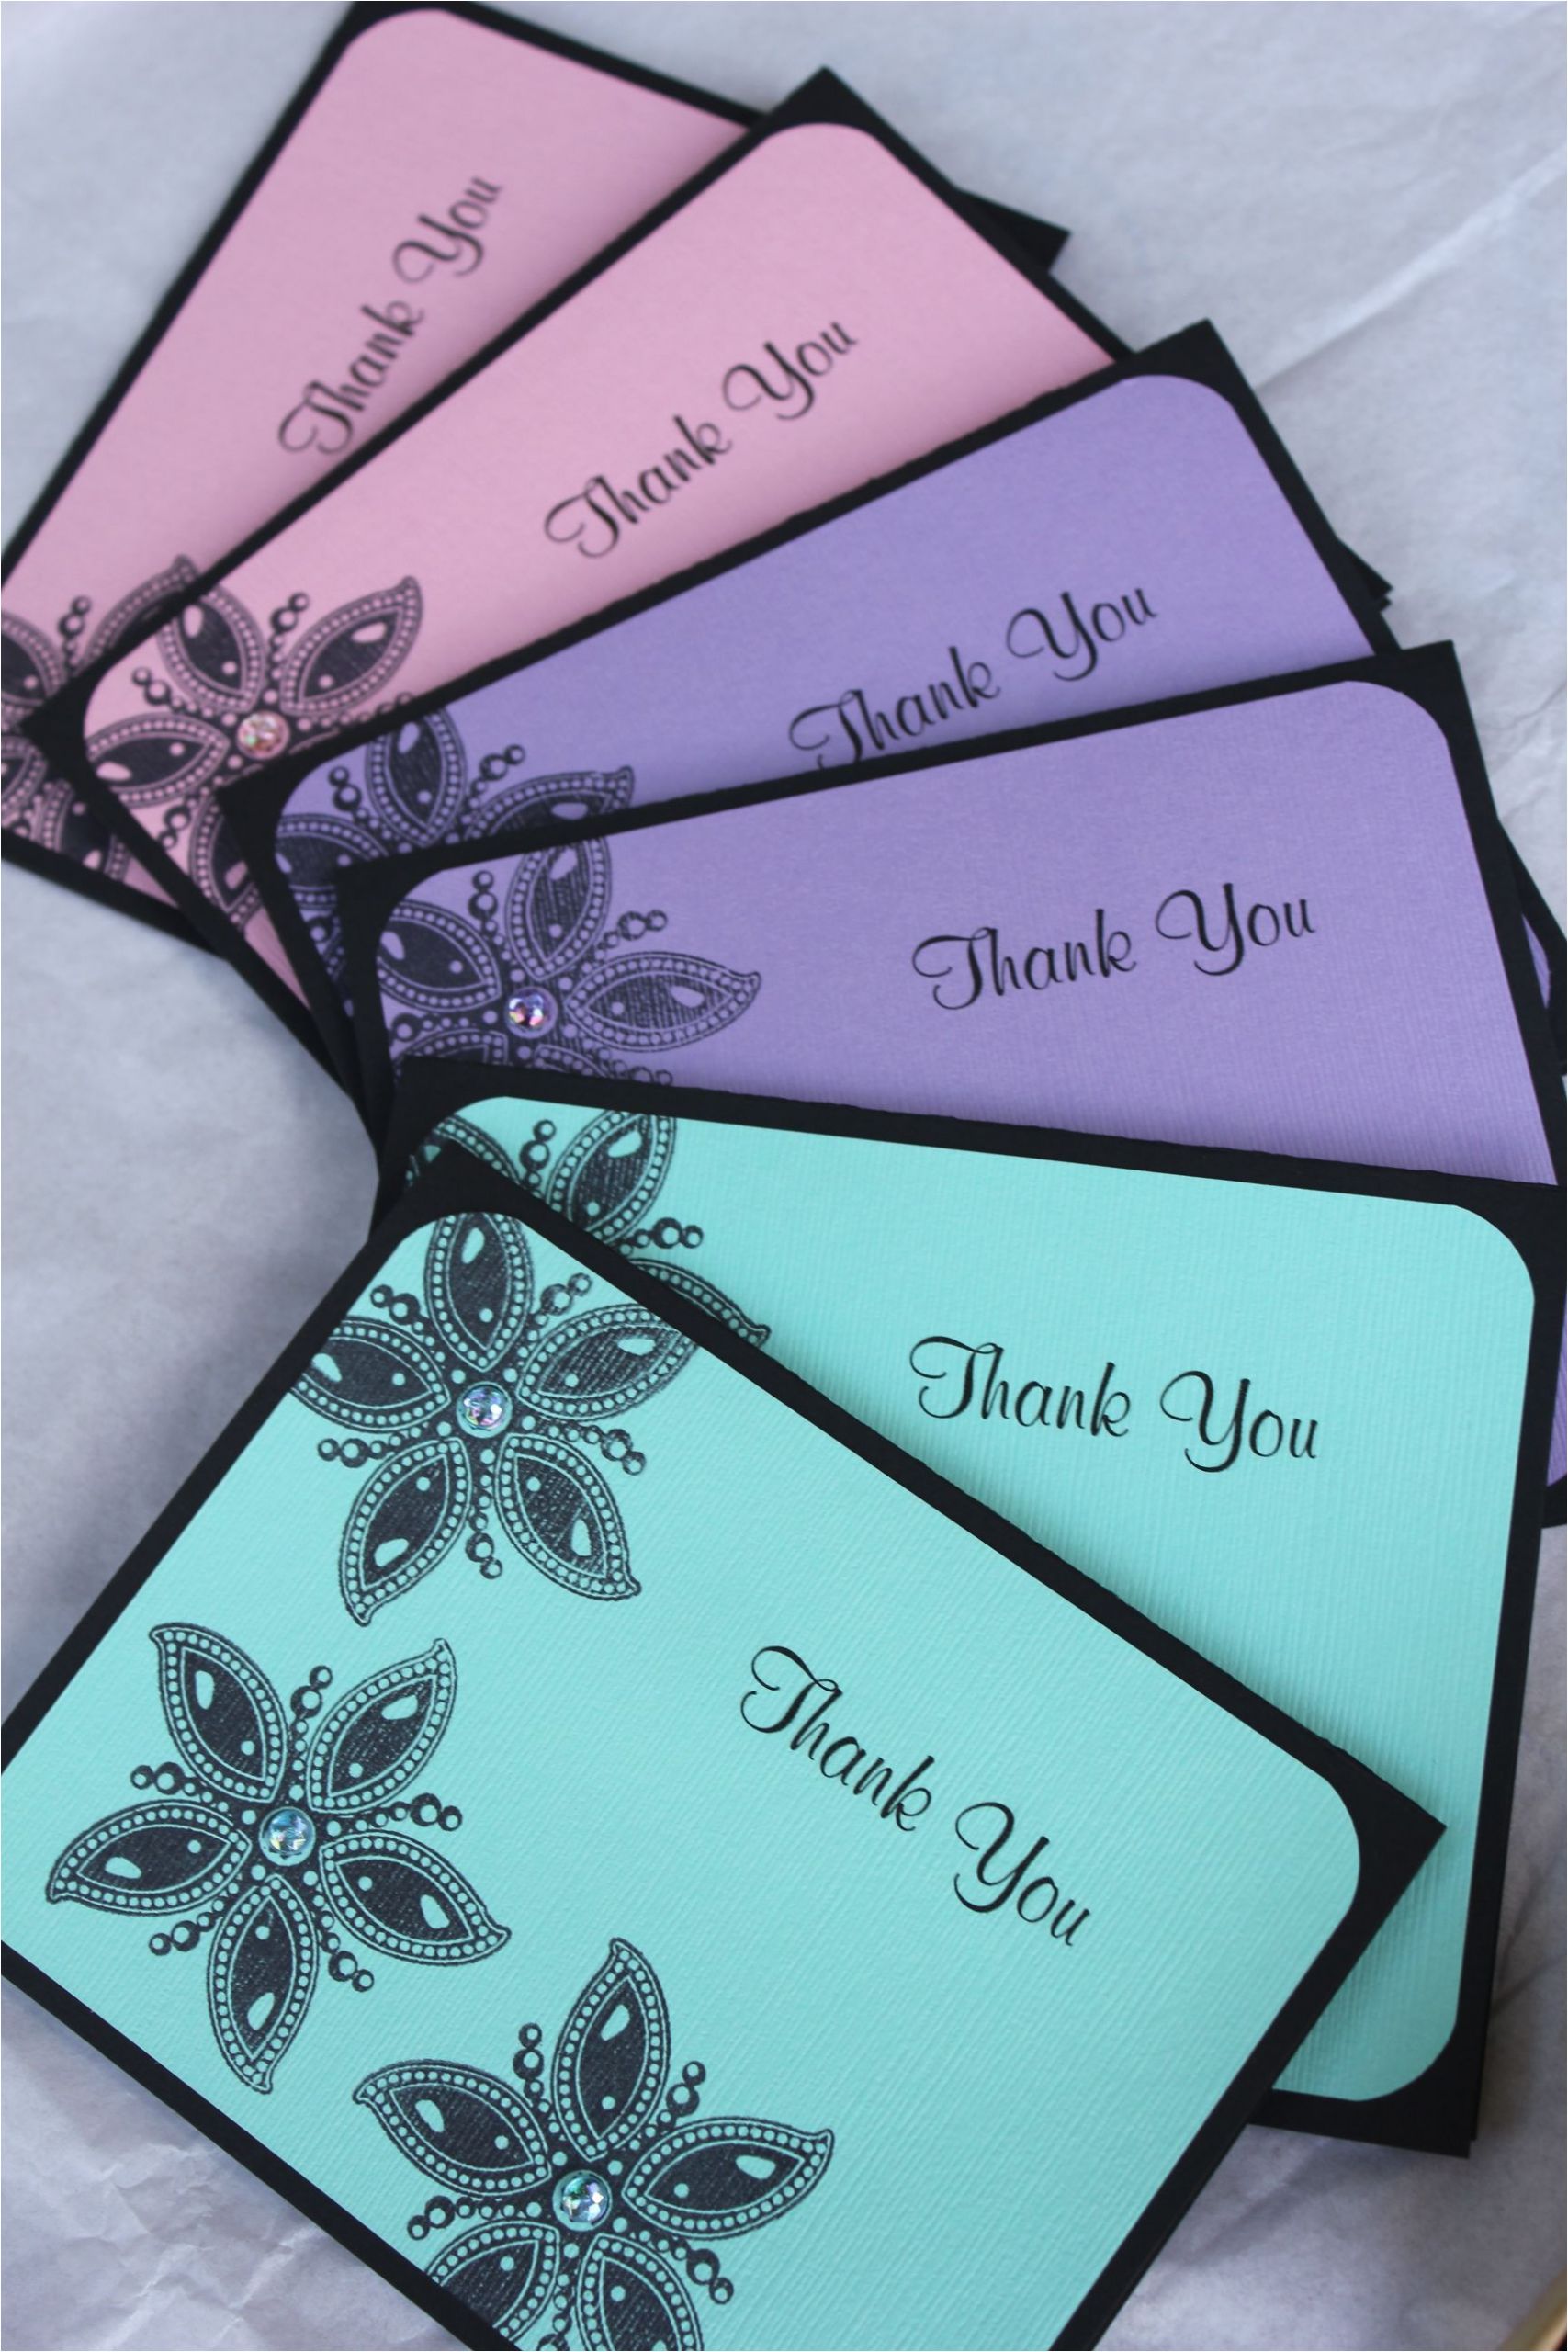 Unique Thank You Card Designs Handmade Thank You Cards by Craftedbylizc Handmade Thank